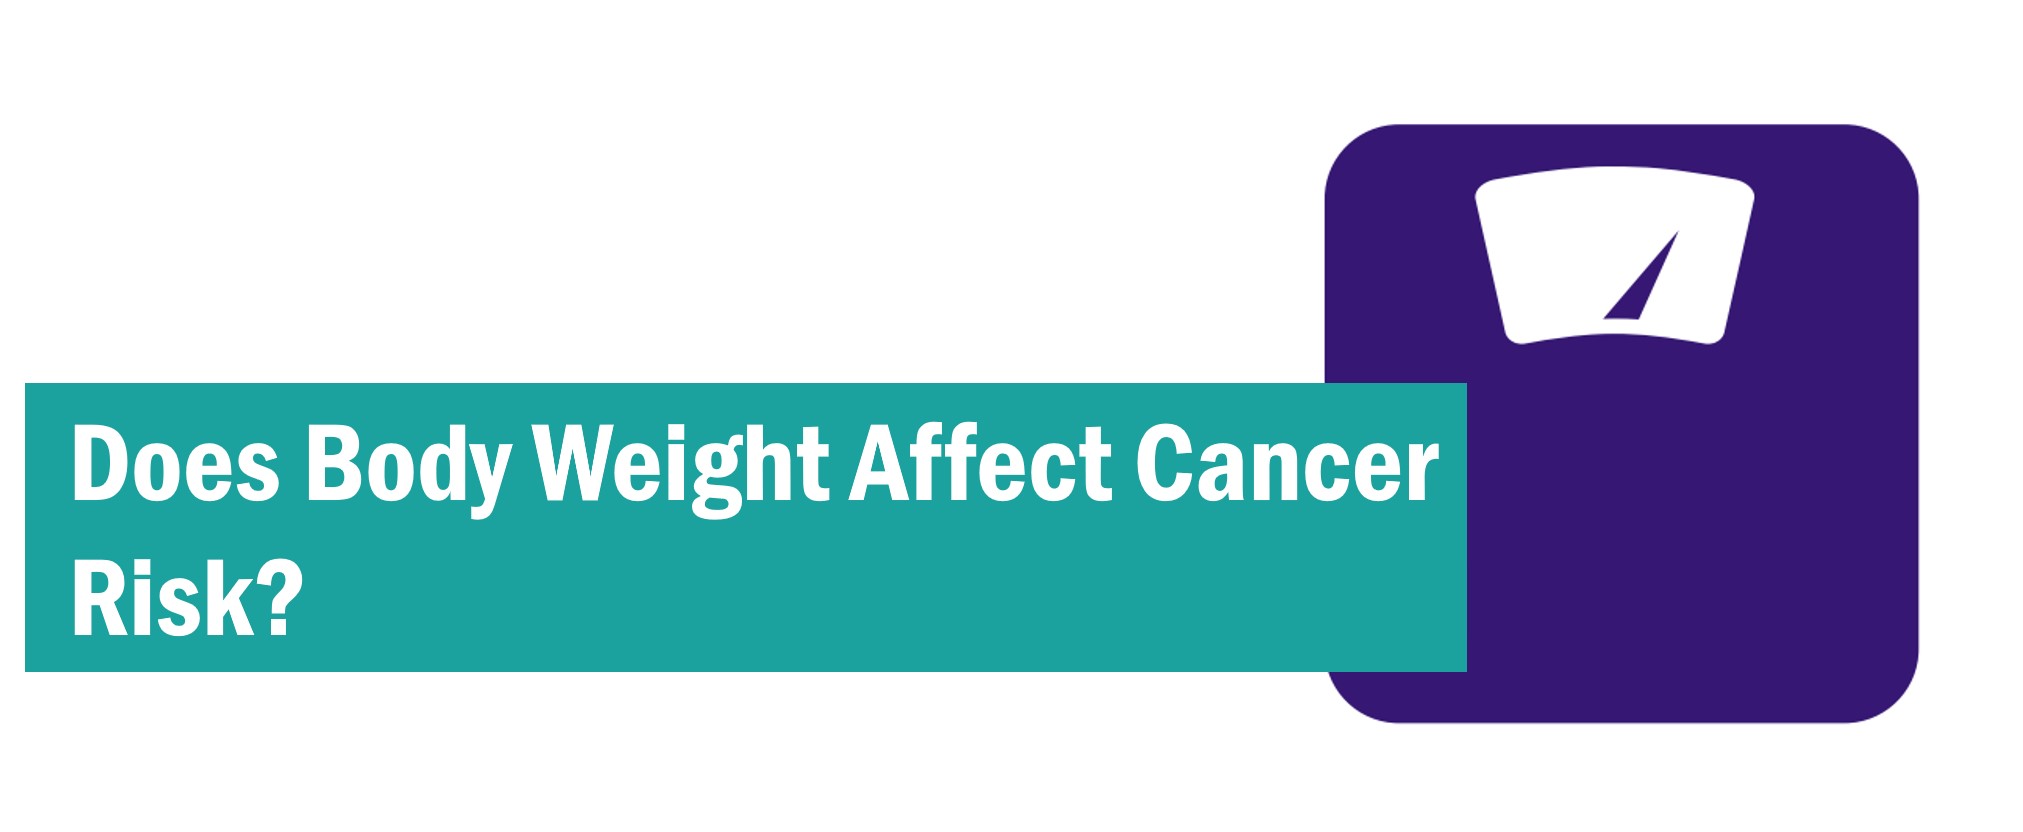 Overweight, Obesity and Cancer – Does Body Weight Affect Cancer Risk?